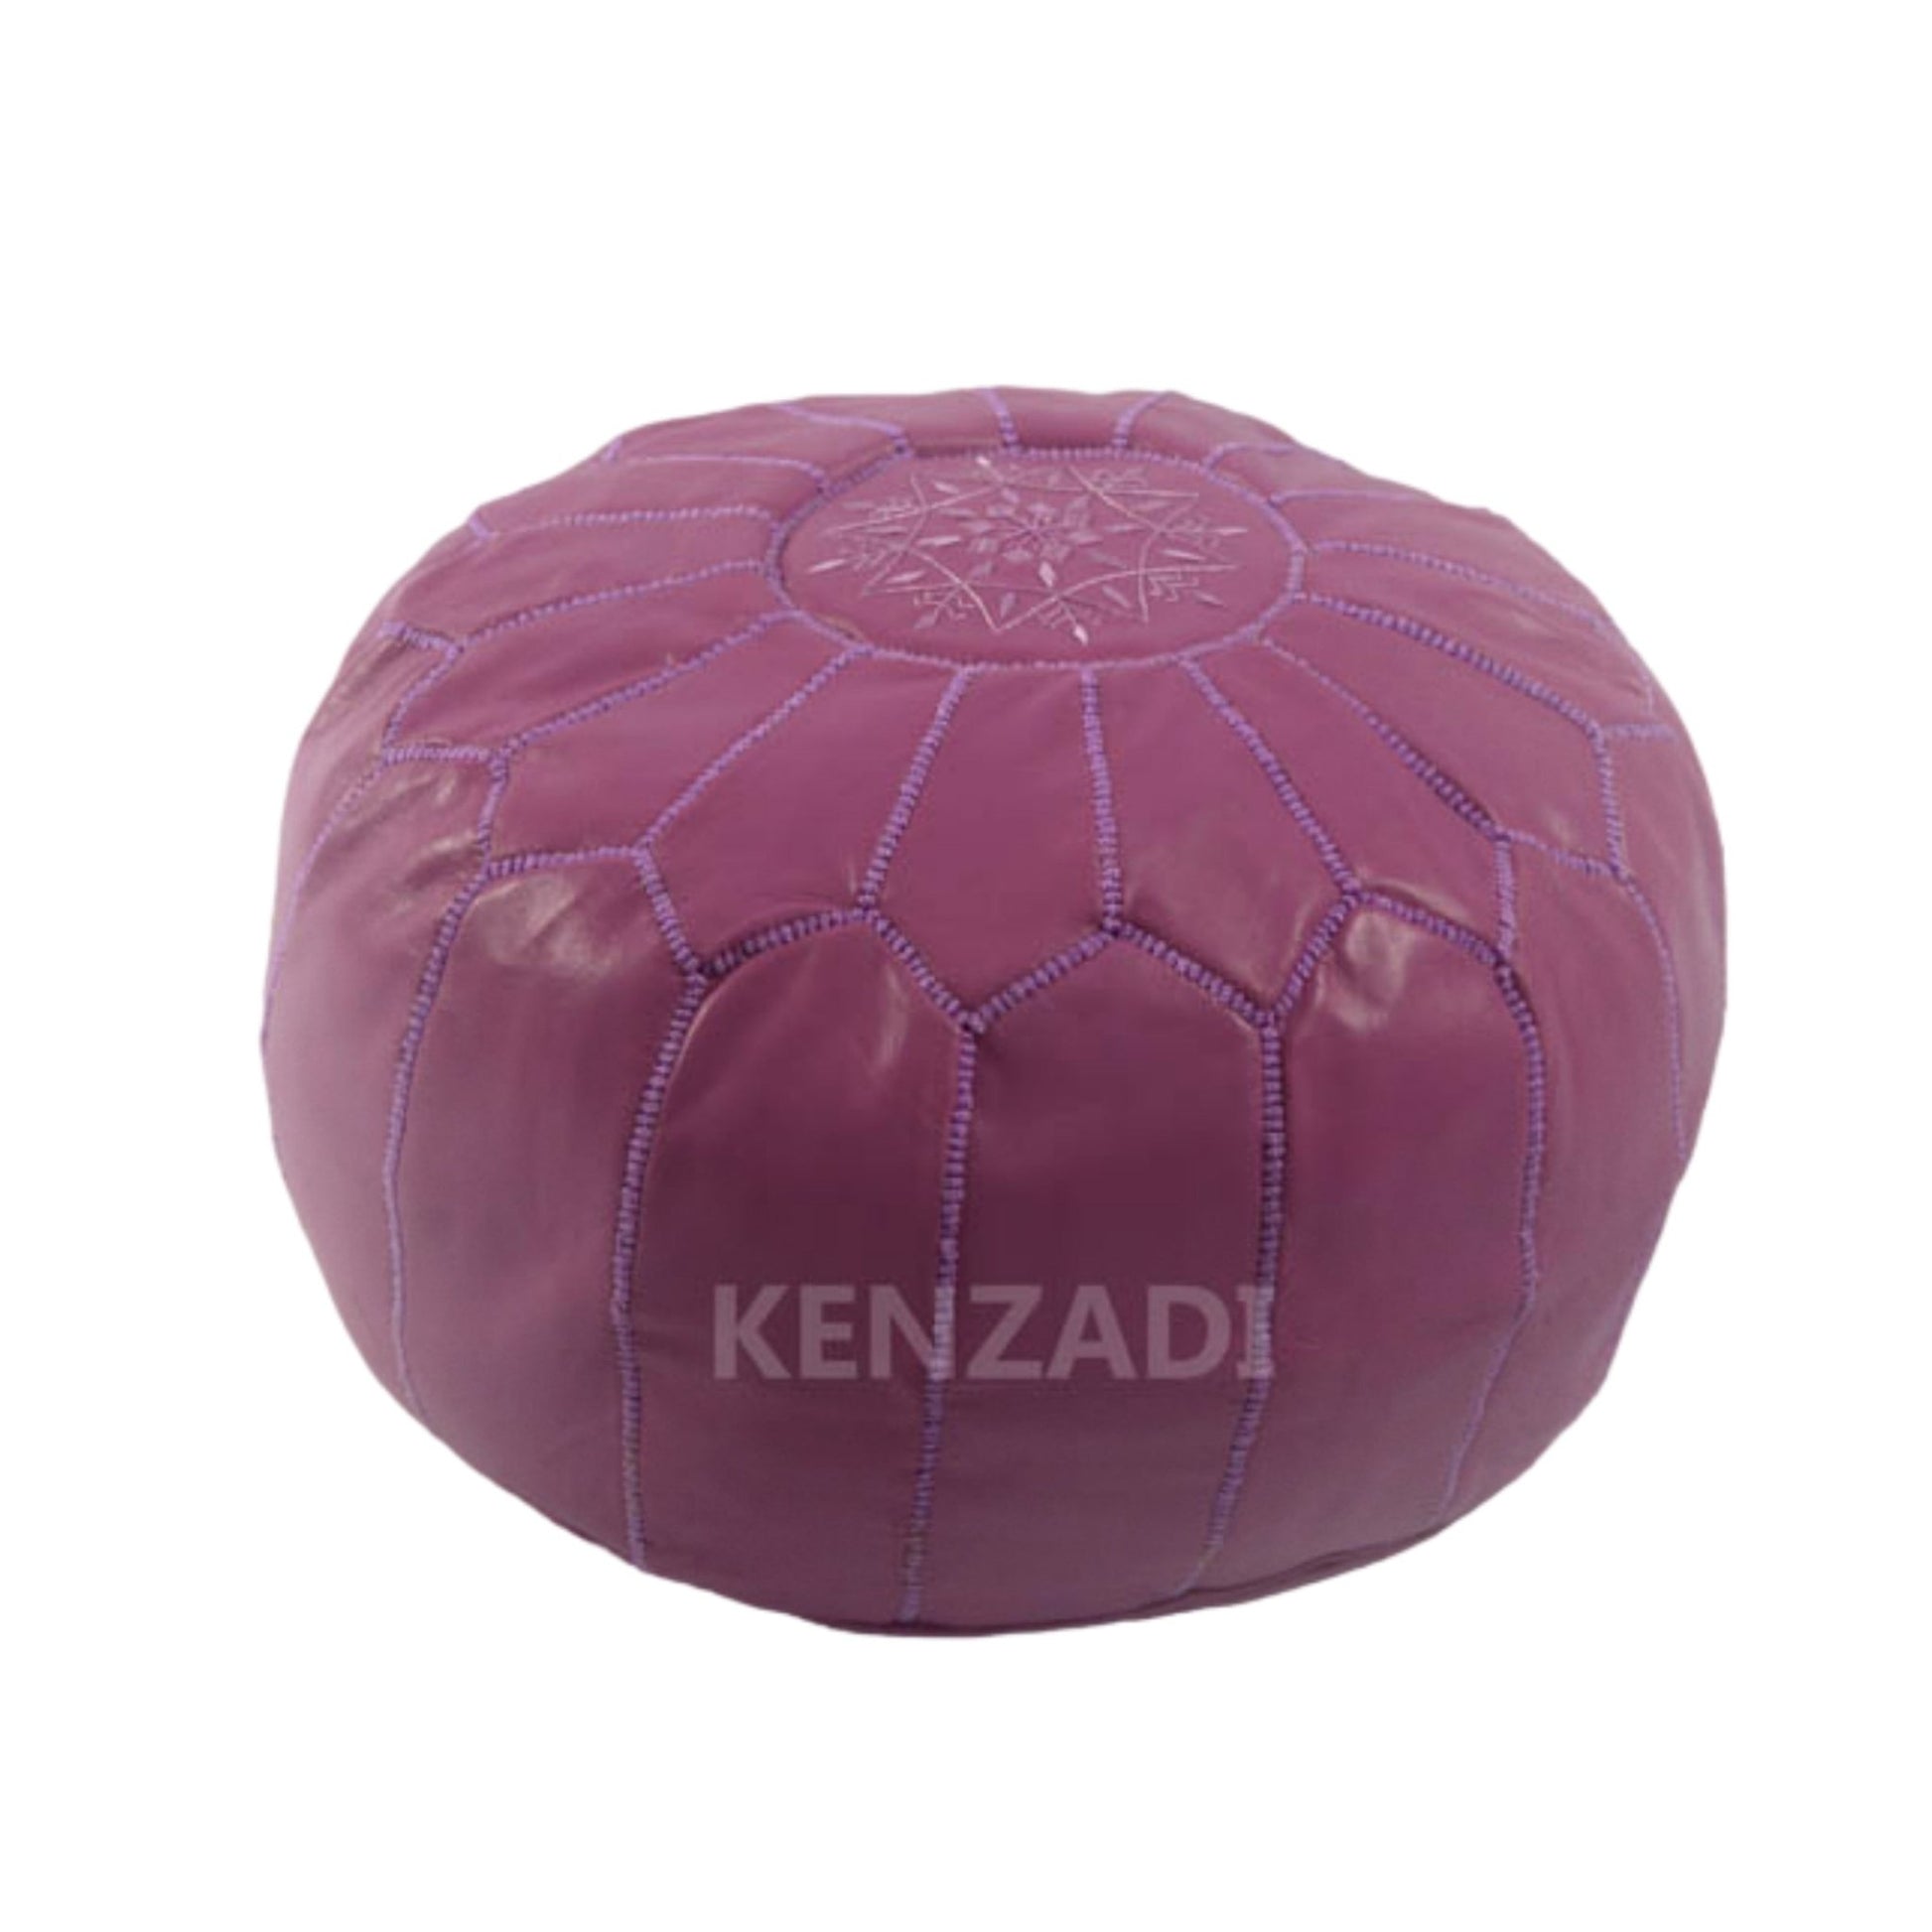 Moroccan leather pouf, round pouf, berber pouf, light purple pouf with purple embroidery by Kenzadi - Handmade by My Poufs